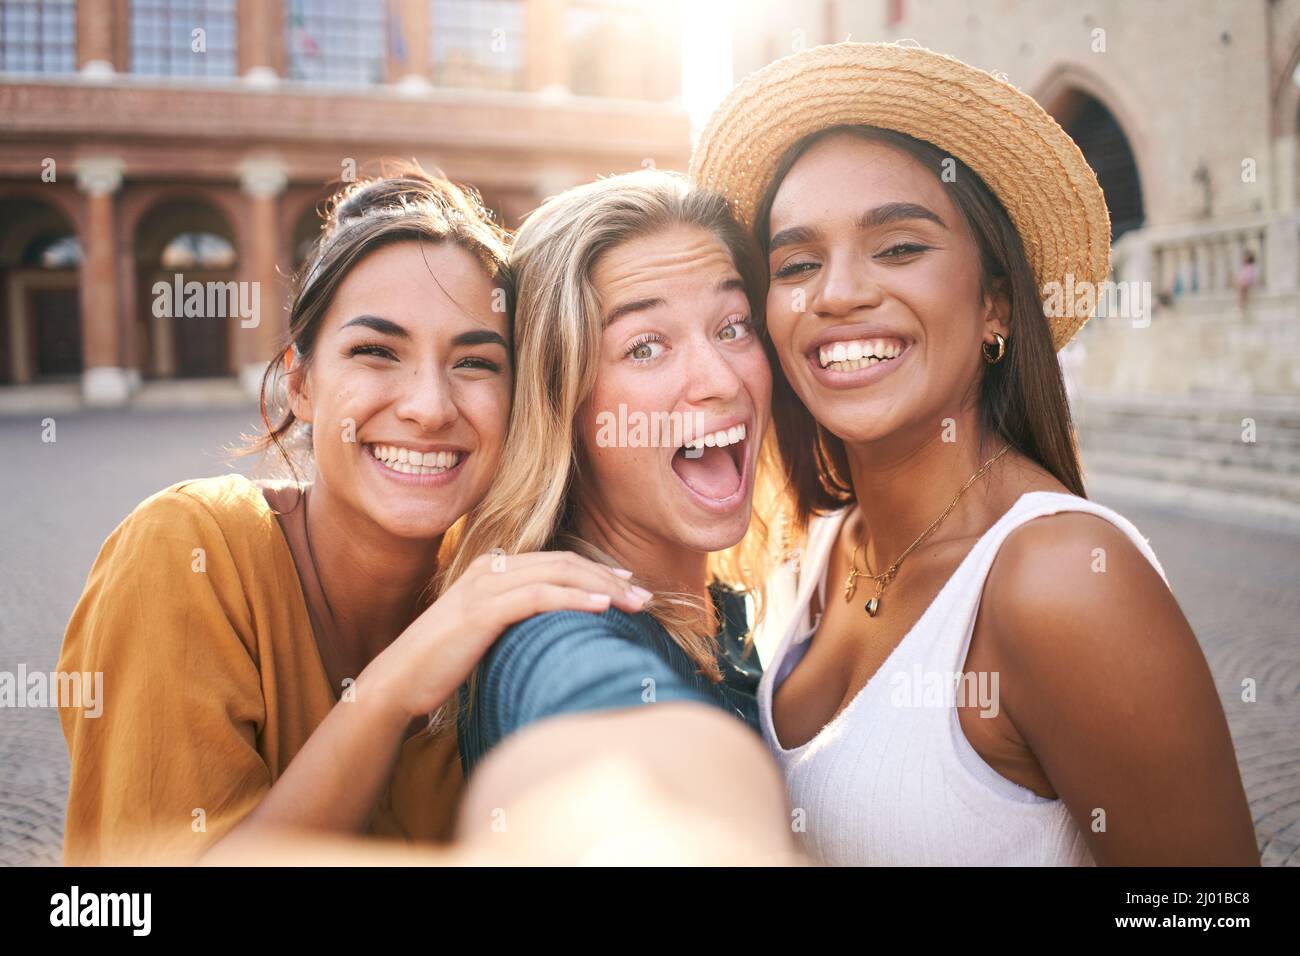 Three funny beautiful girls friends in summer clothes taking a selfie outdoors at the touristic urban center city Stock Photo